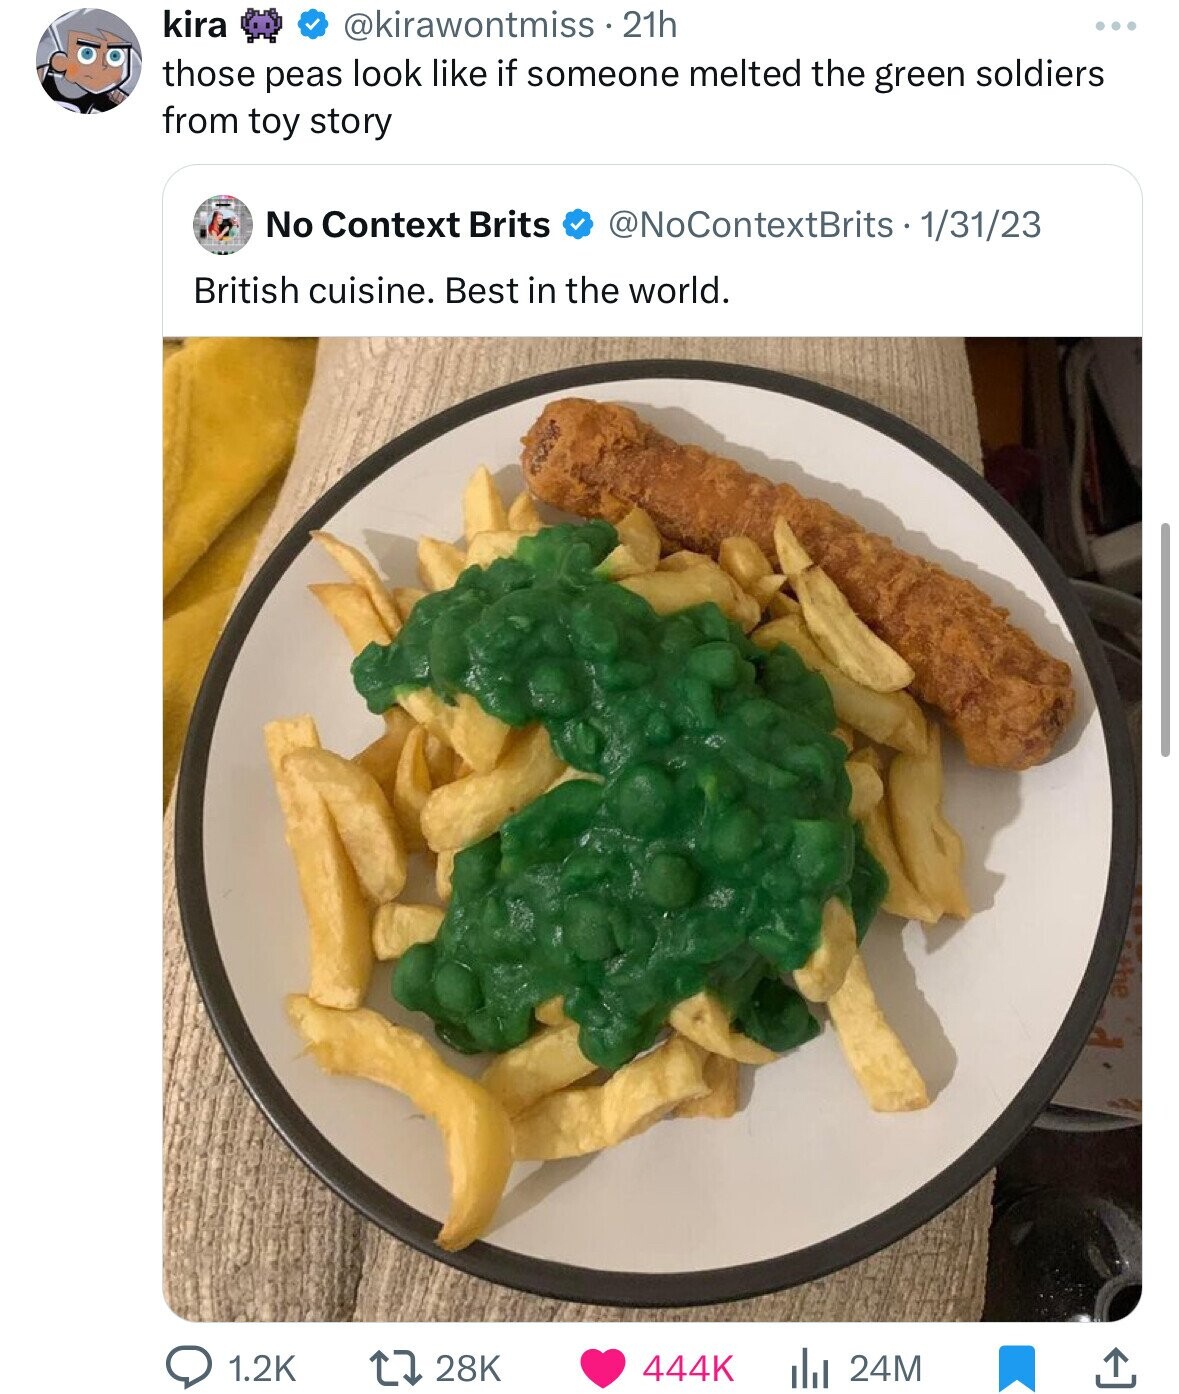 british cuisine meme - kira 21h those peas look if someone melted the green soldiers from toy story No Context Brits 13123 British cuisine. Best in the world. il 24M